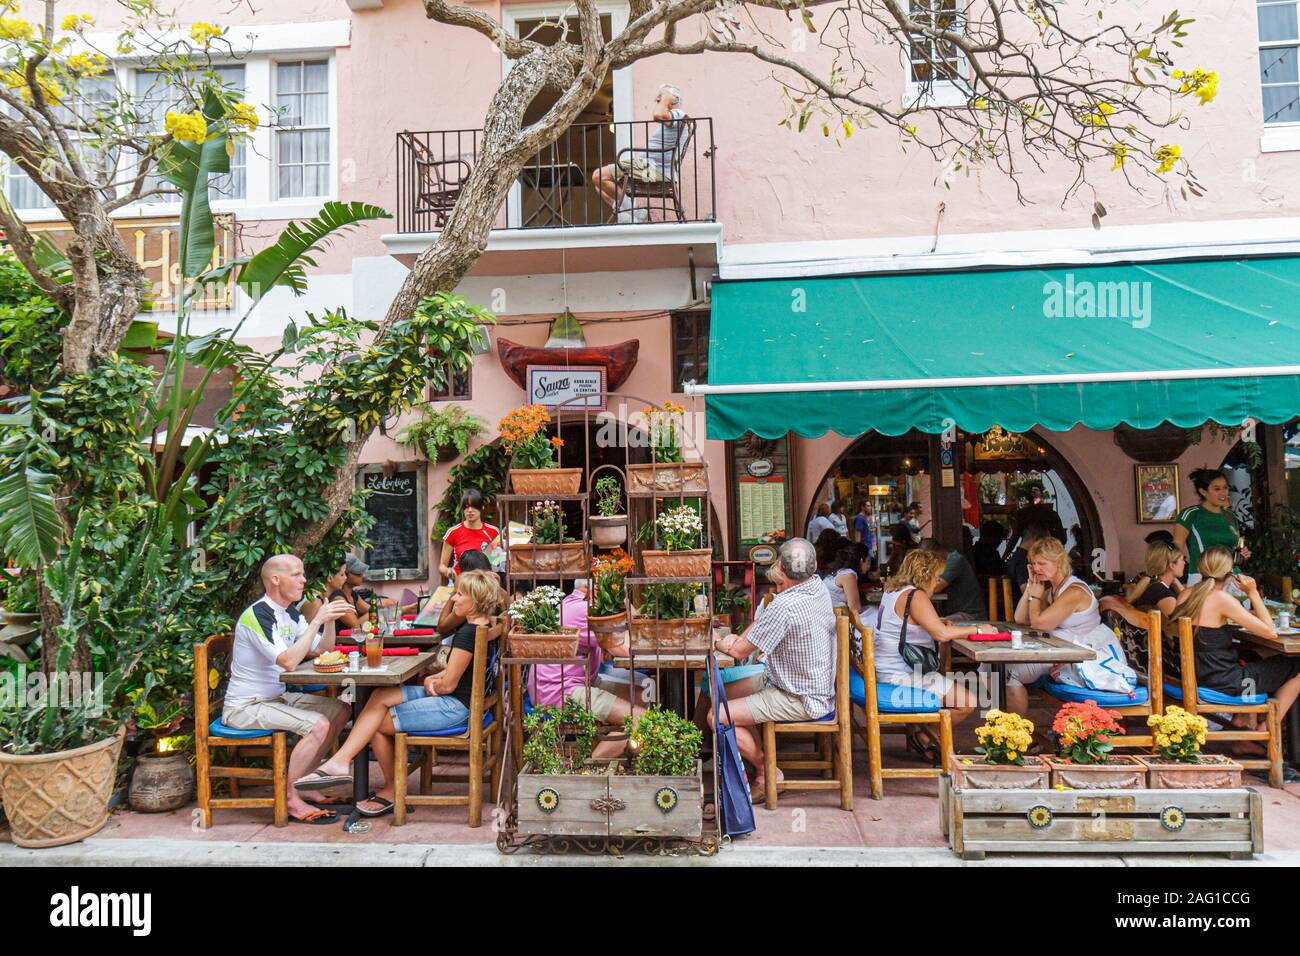 Miami Beach Florida,Espanola Way,restaurant restaurants food dining eating out cafe cafes bistro,al fresco sidewalk outside open air tables,dining,vis Stock Photo